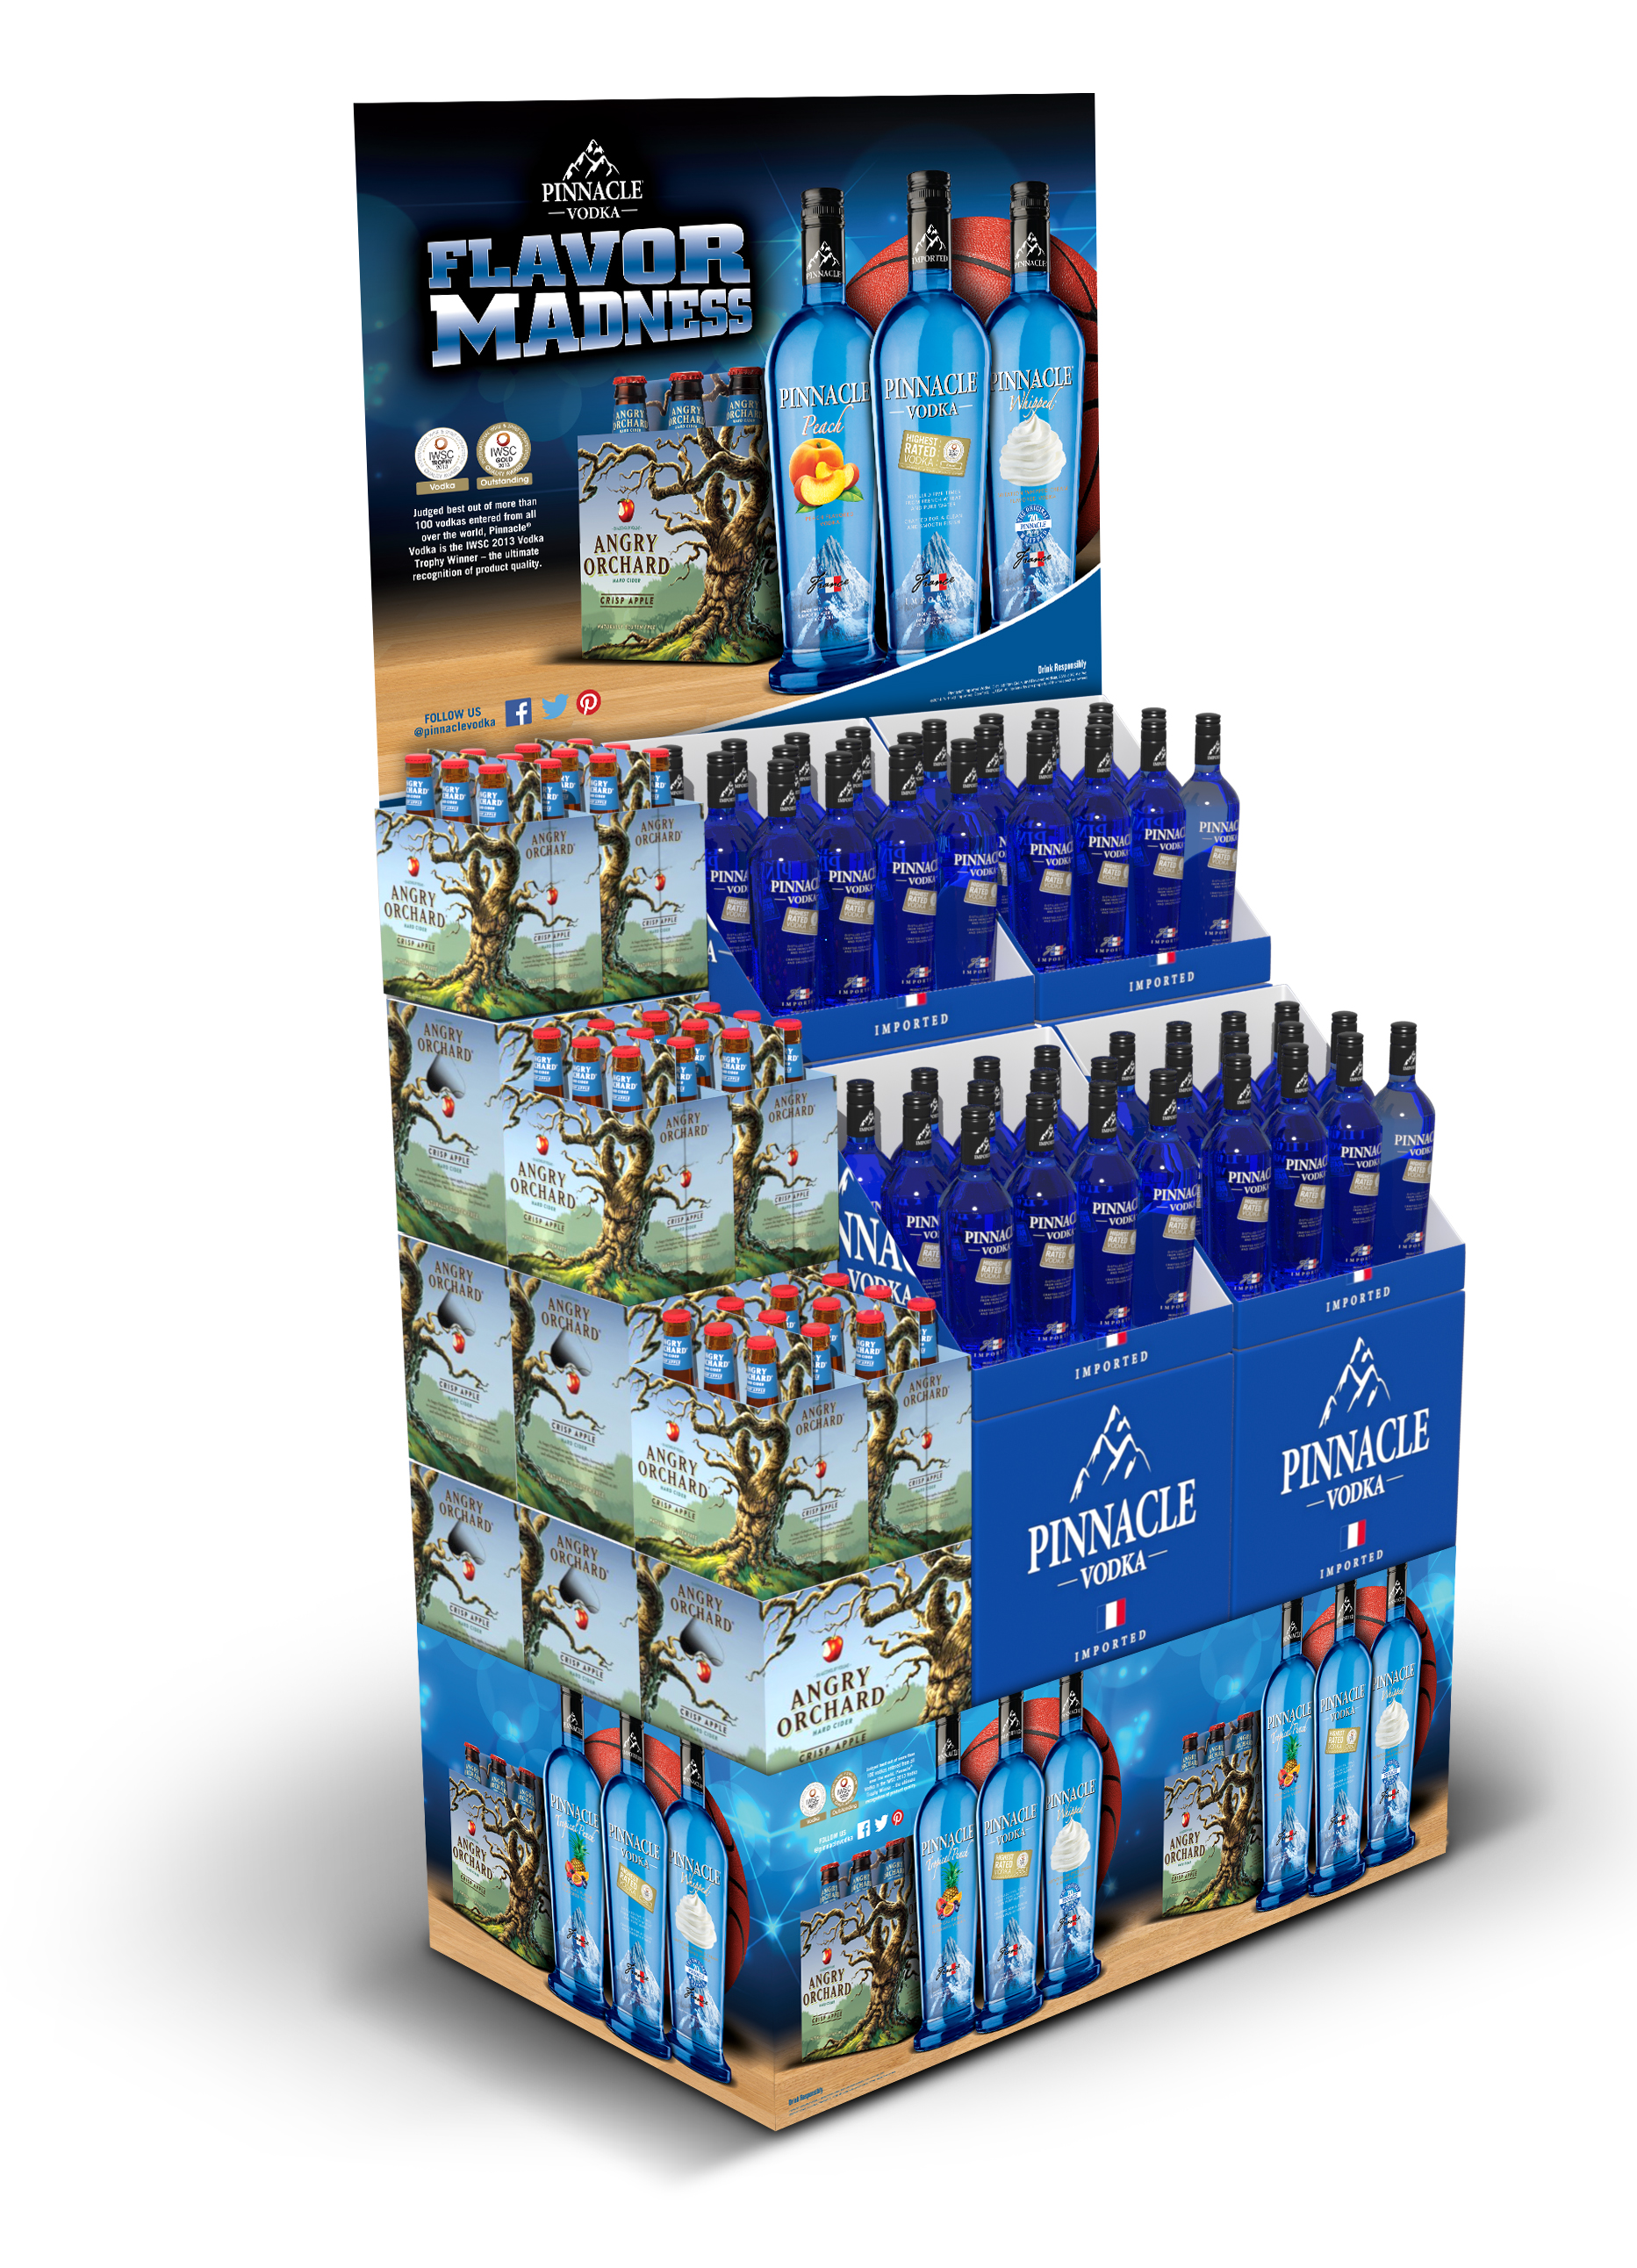 Pinacle_Vodka_Angry_Orchard_Flavor_Madness_Display_ON_DECK_CS.jpg